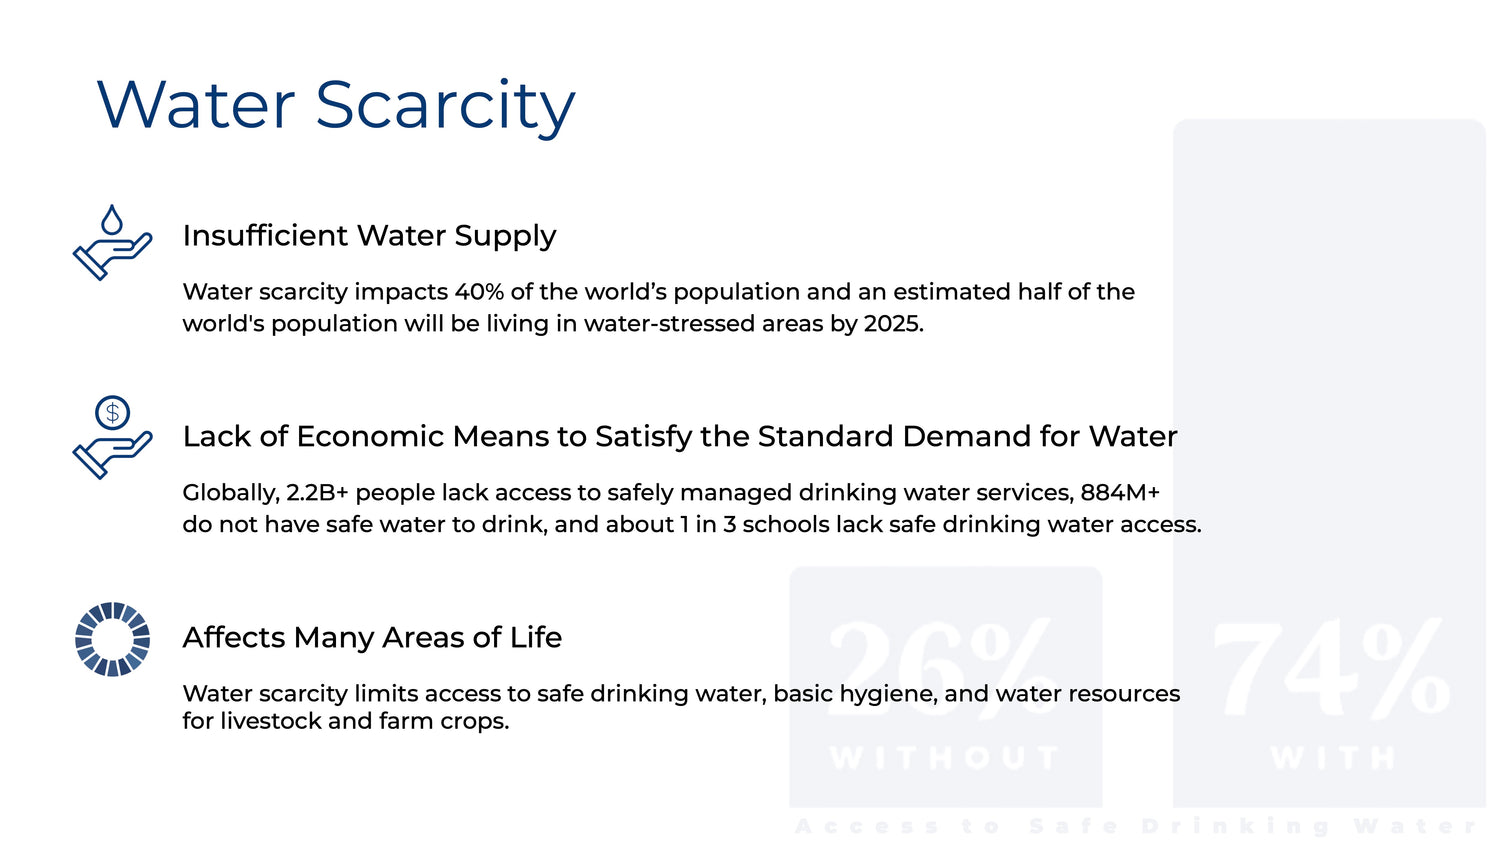 Water Scarcity: insufficient water supply, lack of economic means to satisfy the demand for drinking water, affects many areas of life.